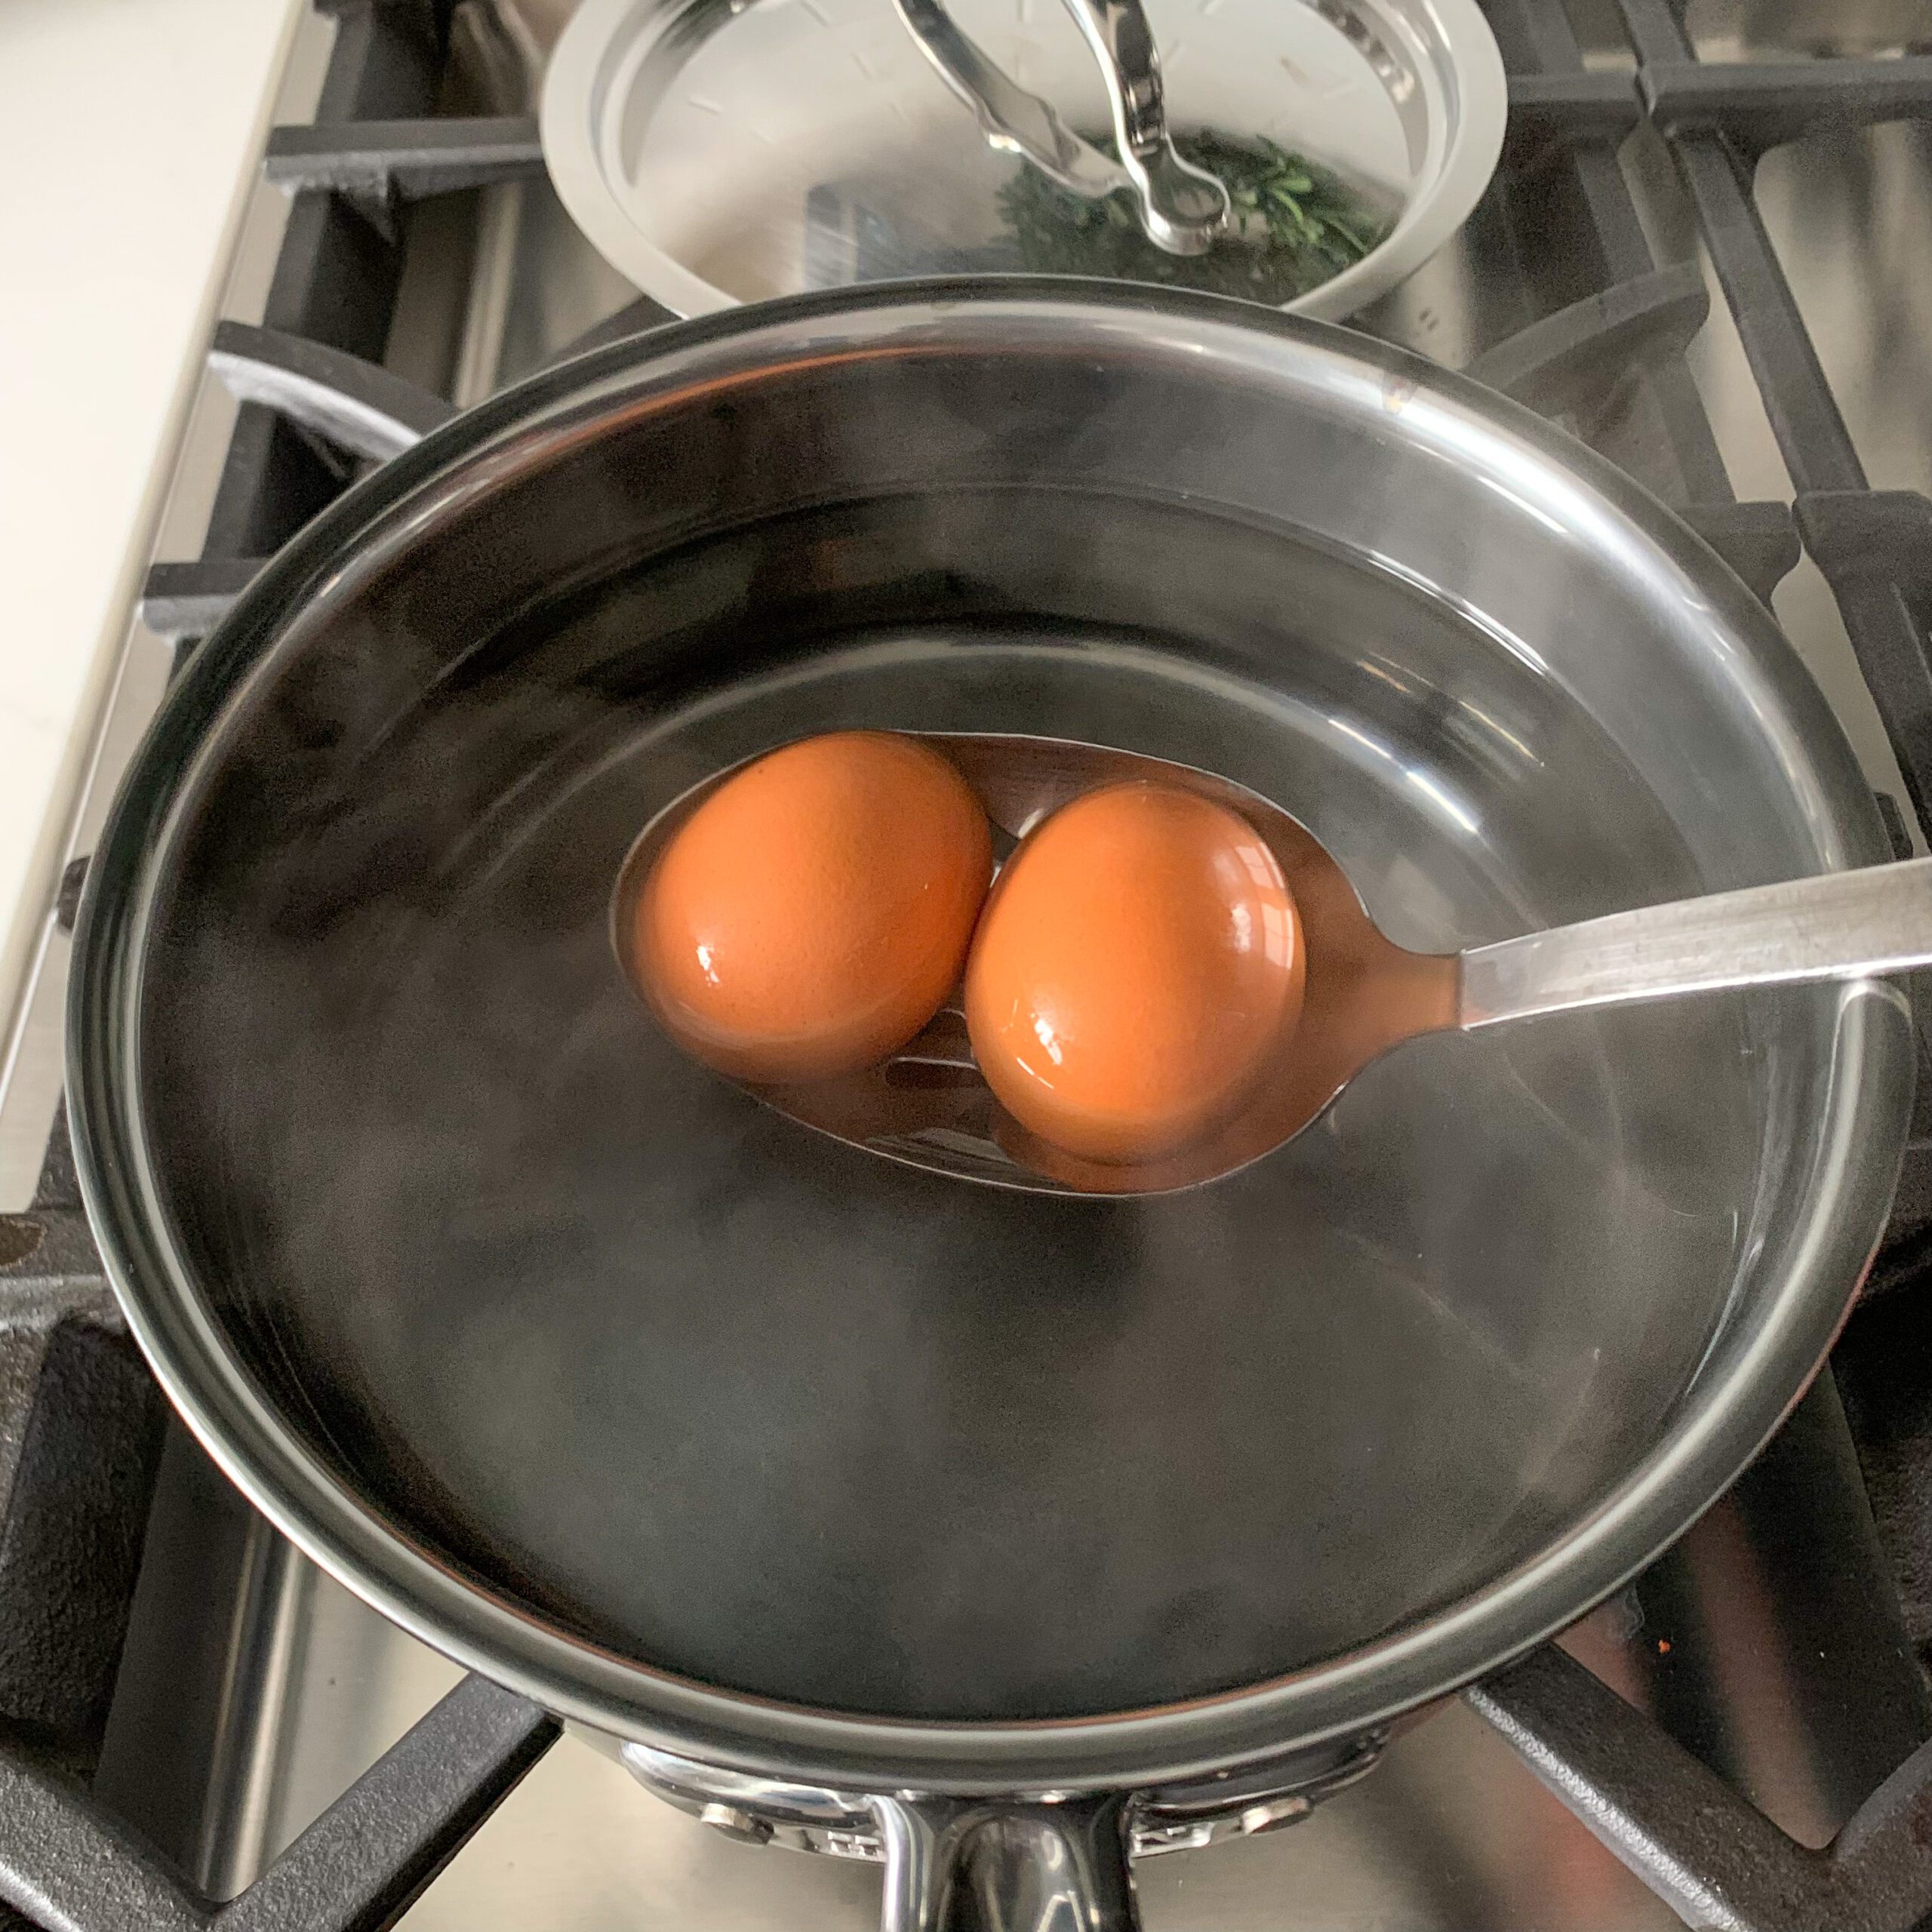 Using a slotted spoon, gently lower the two eggs into the water.